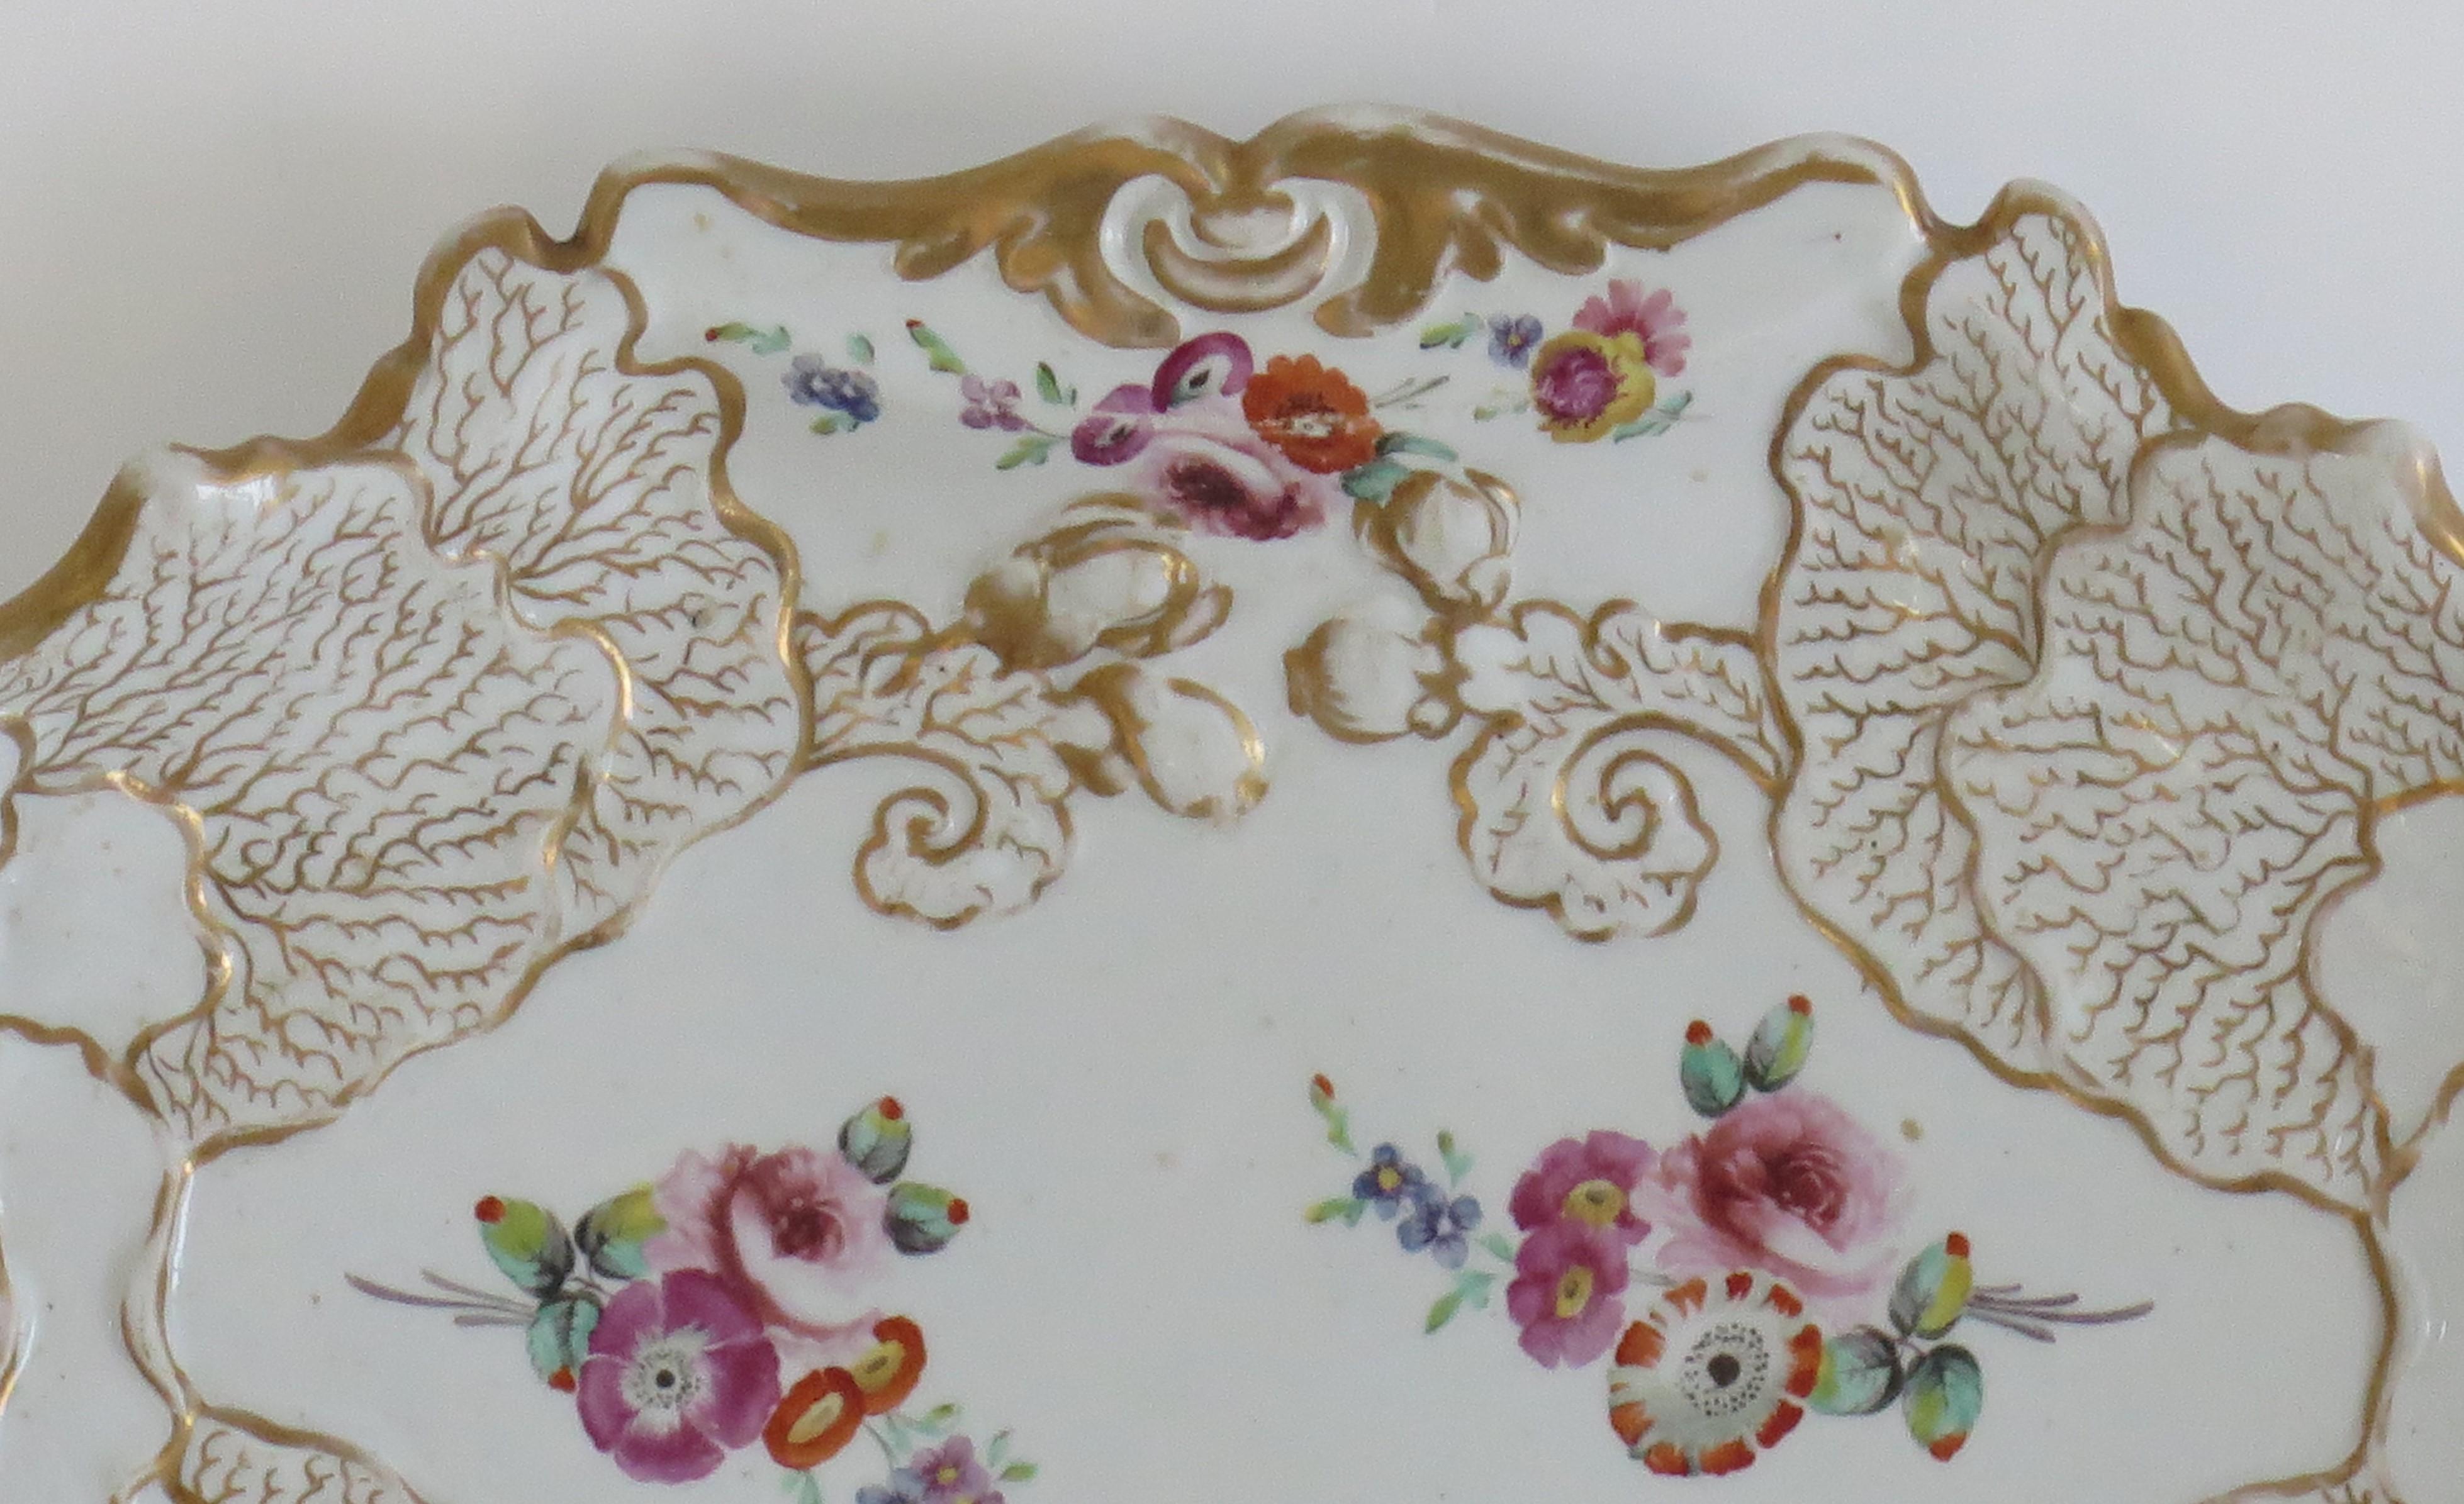 This is a finely hand painted Mason's ironstone Serving Desert Dish in a rare Cabbage leaf, gold veined pattern called 